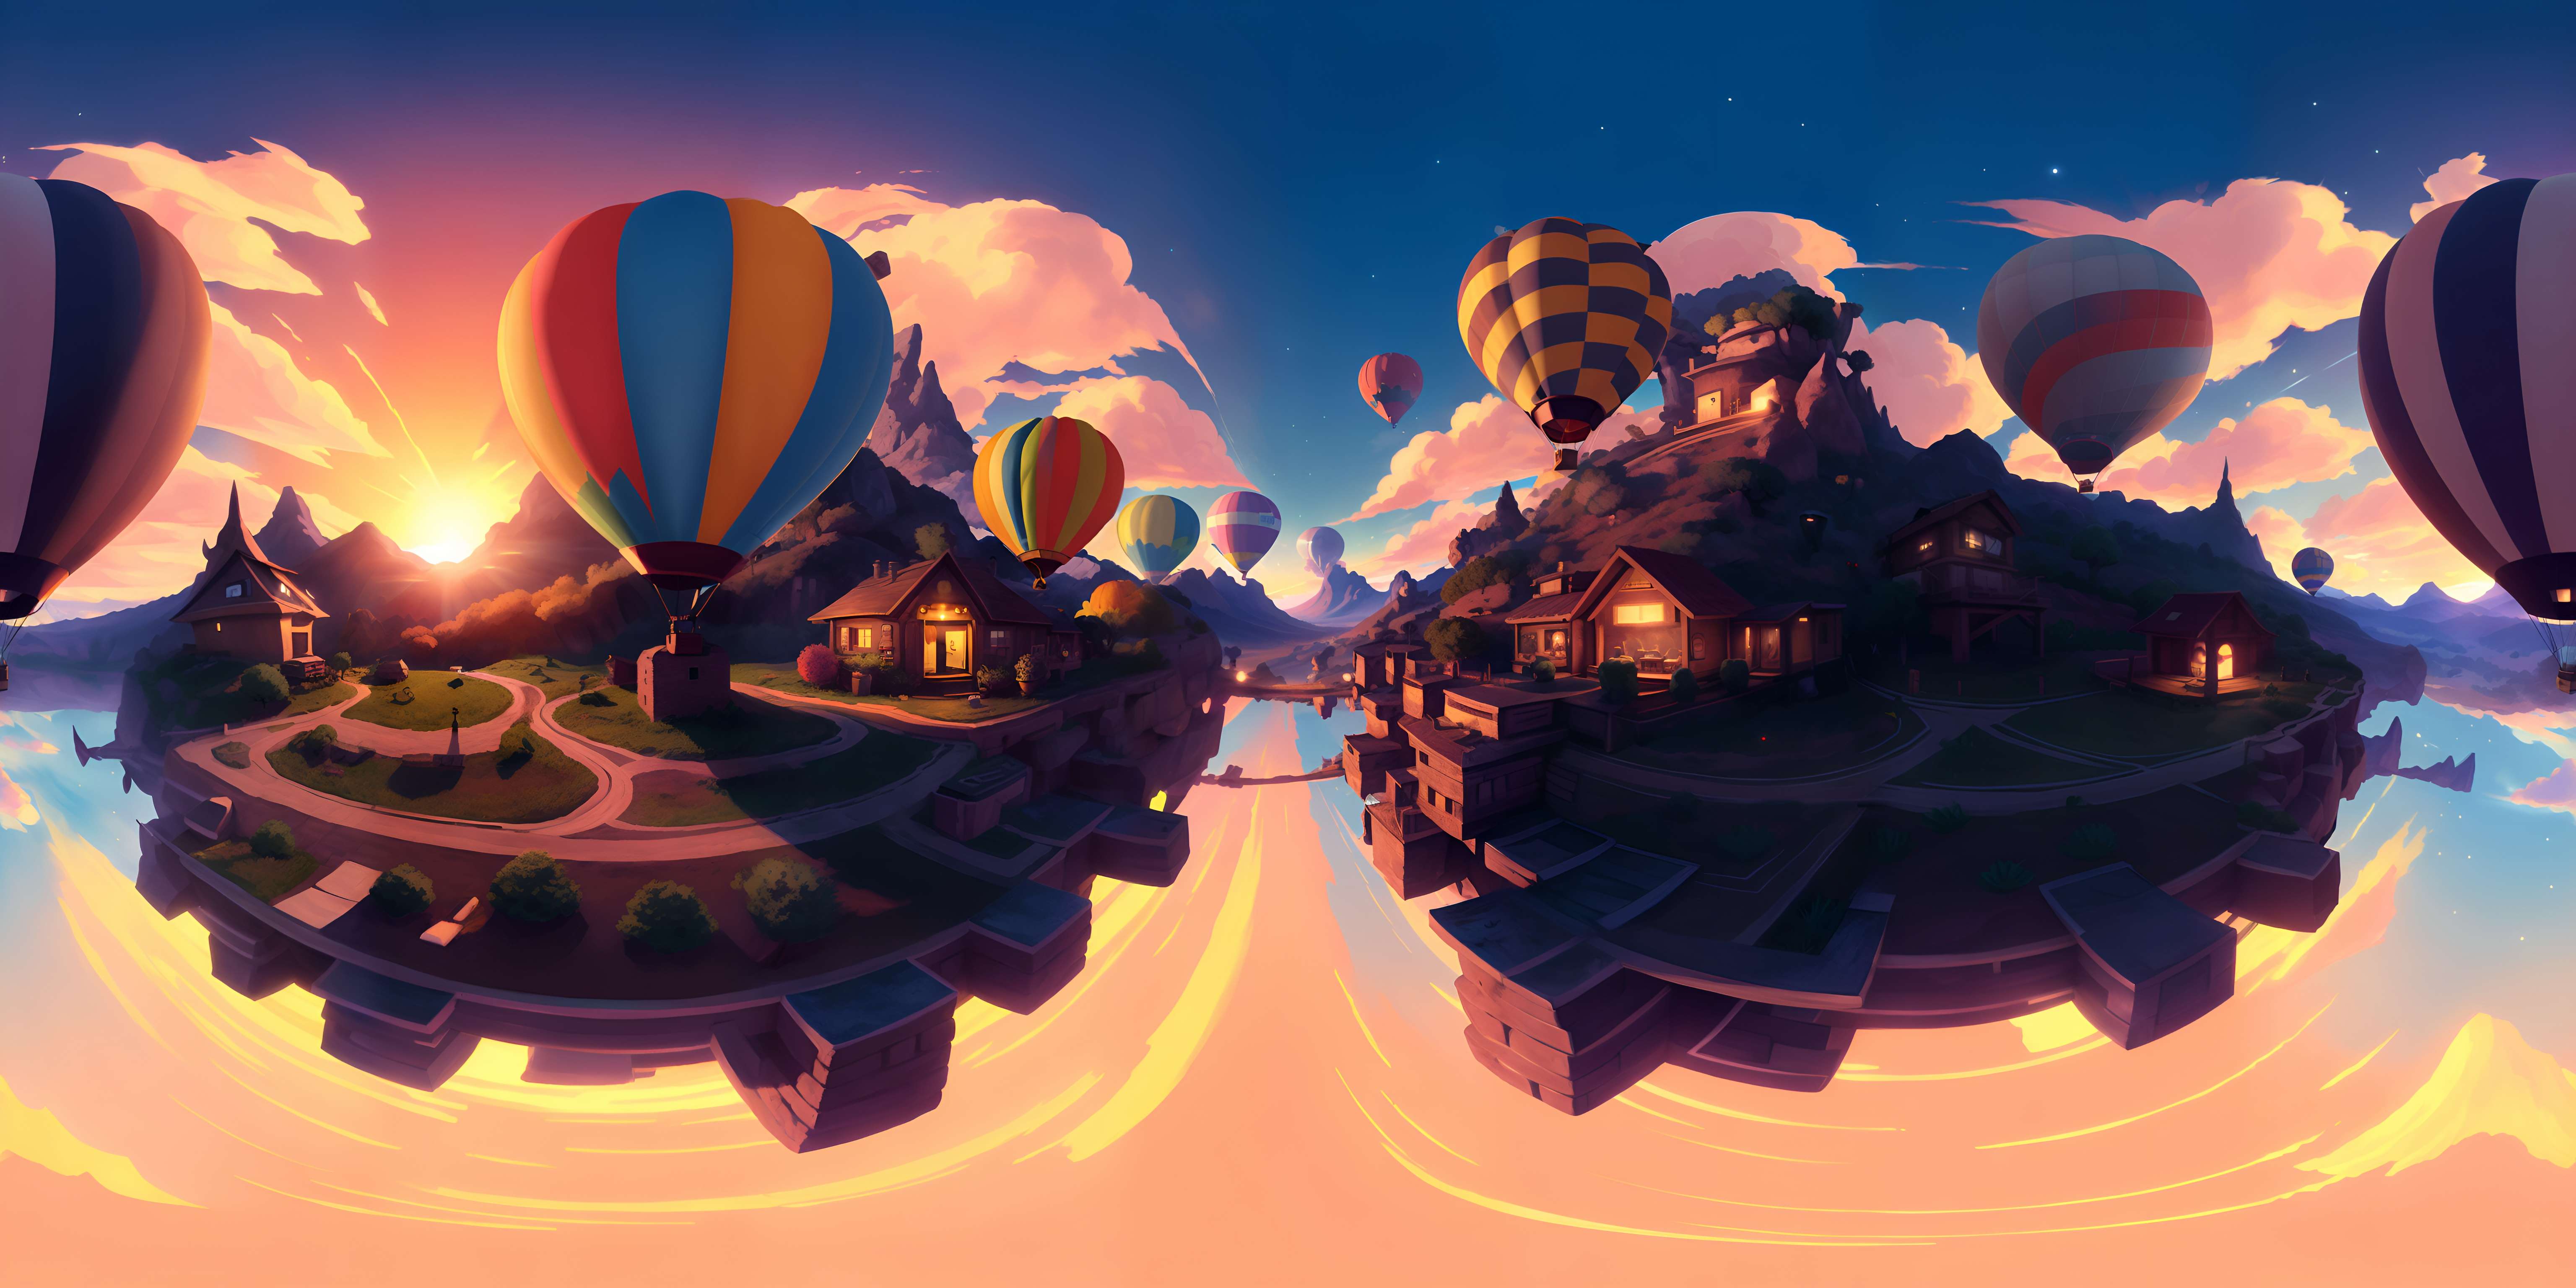 Hot Air Balloons Sky Overlay 16x by Konkov on PvPRP